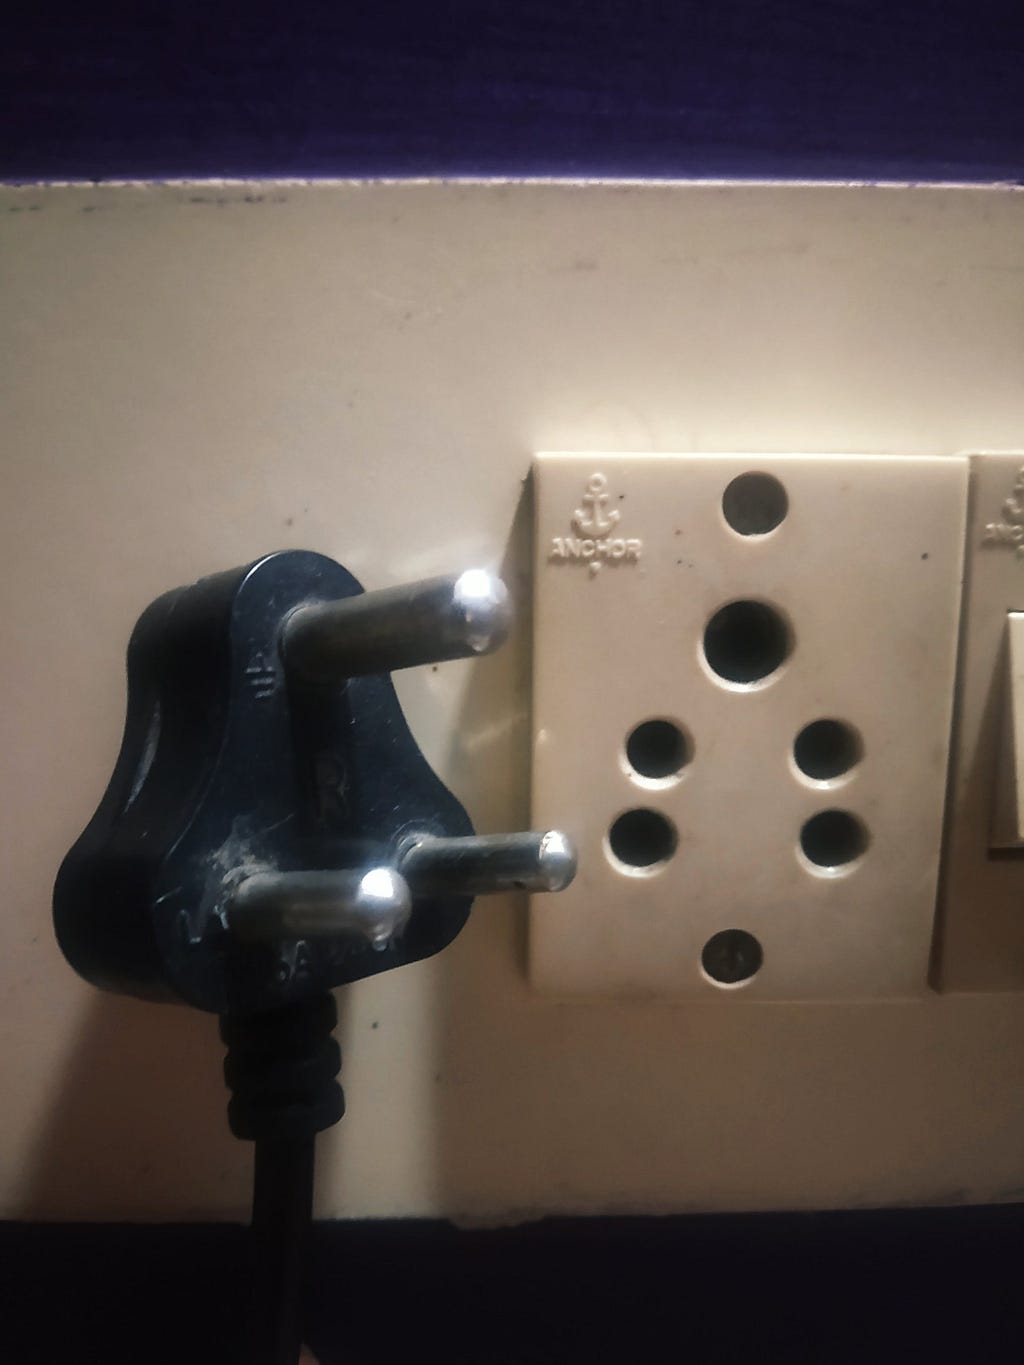 Photograph of Plug and Switch.